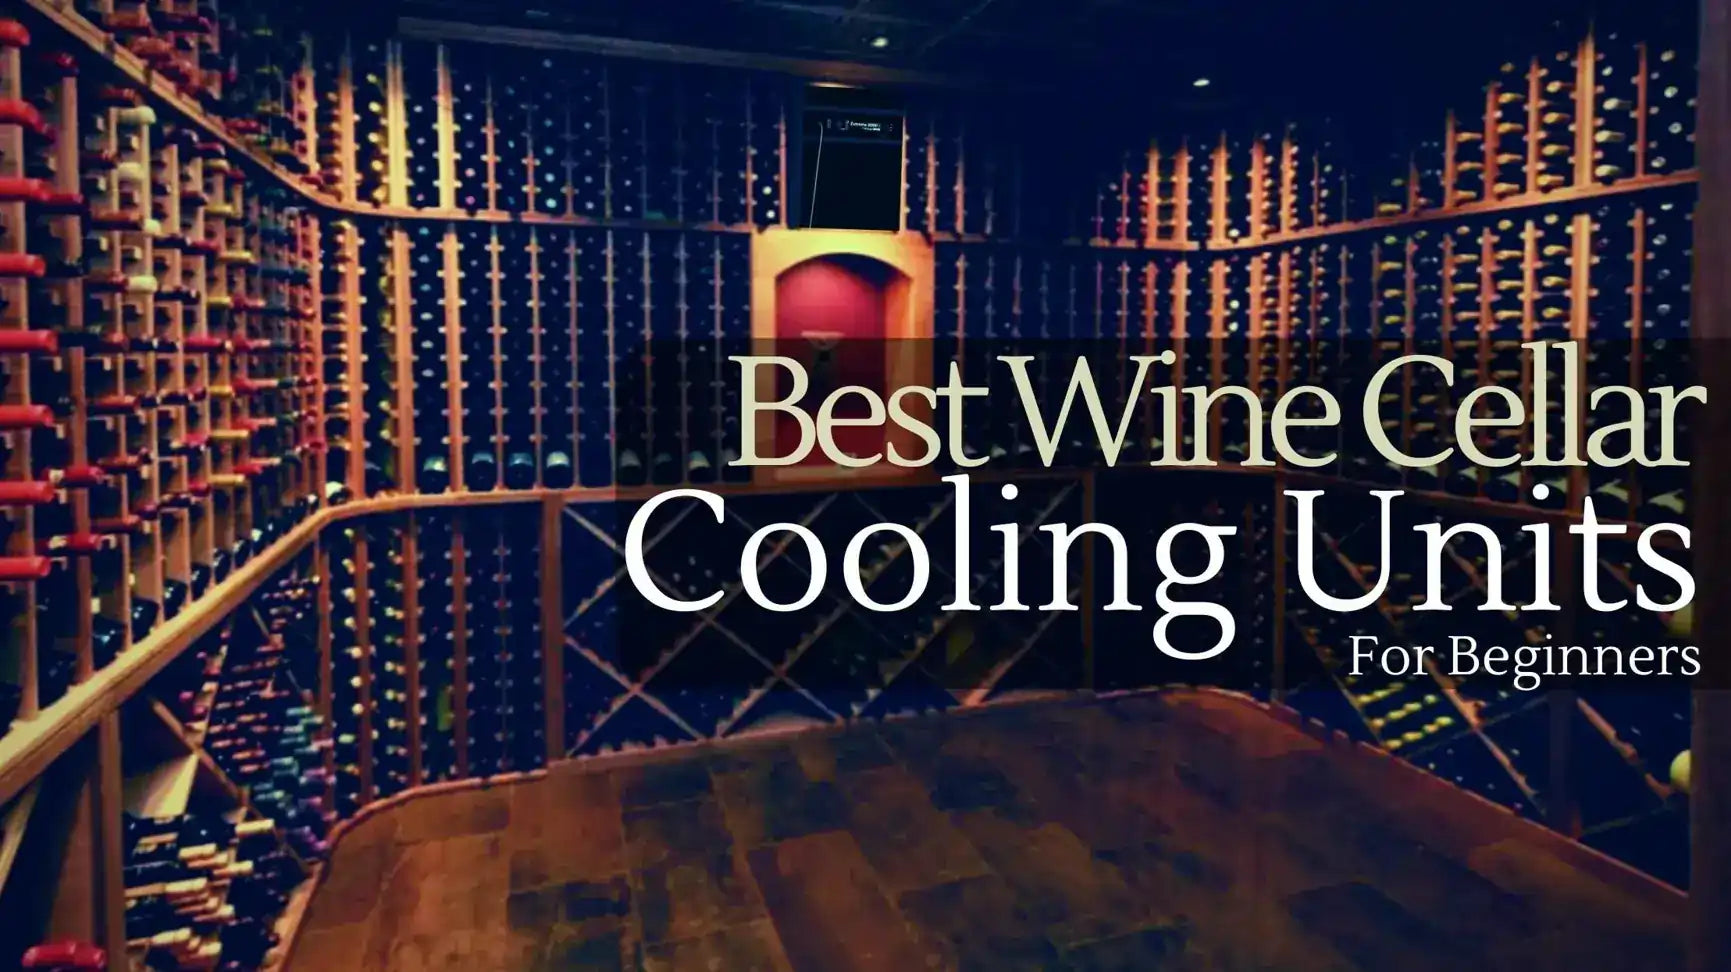 Best Wine Cellar Cooling Unit for Beginners - Wine Cooling Units | Wine Coolers Empire - Trusted Dealer